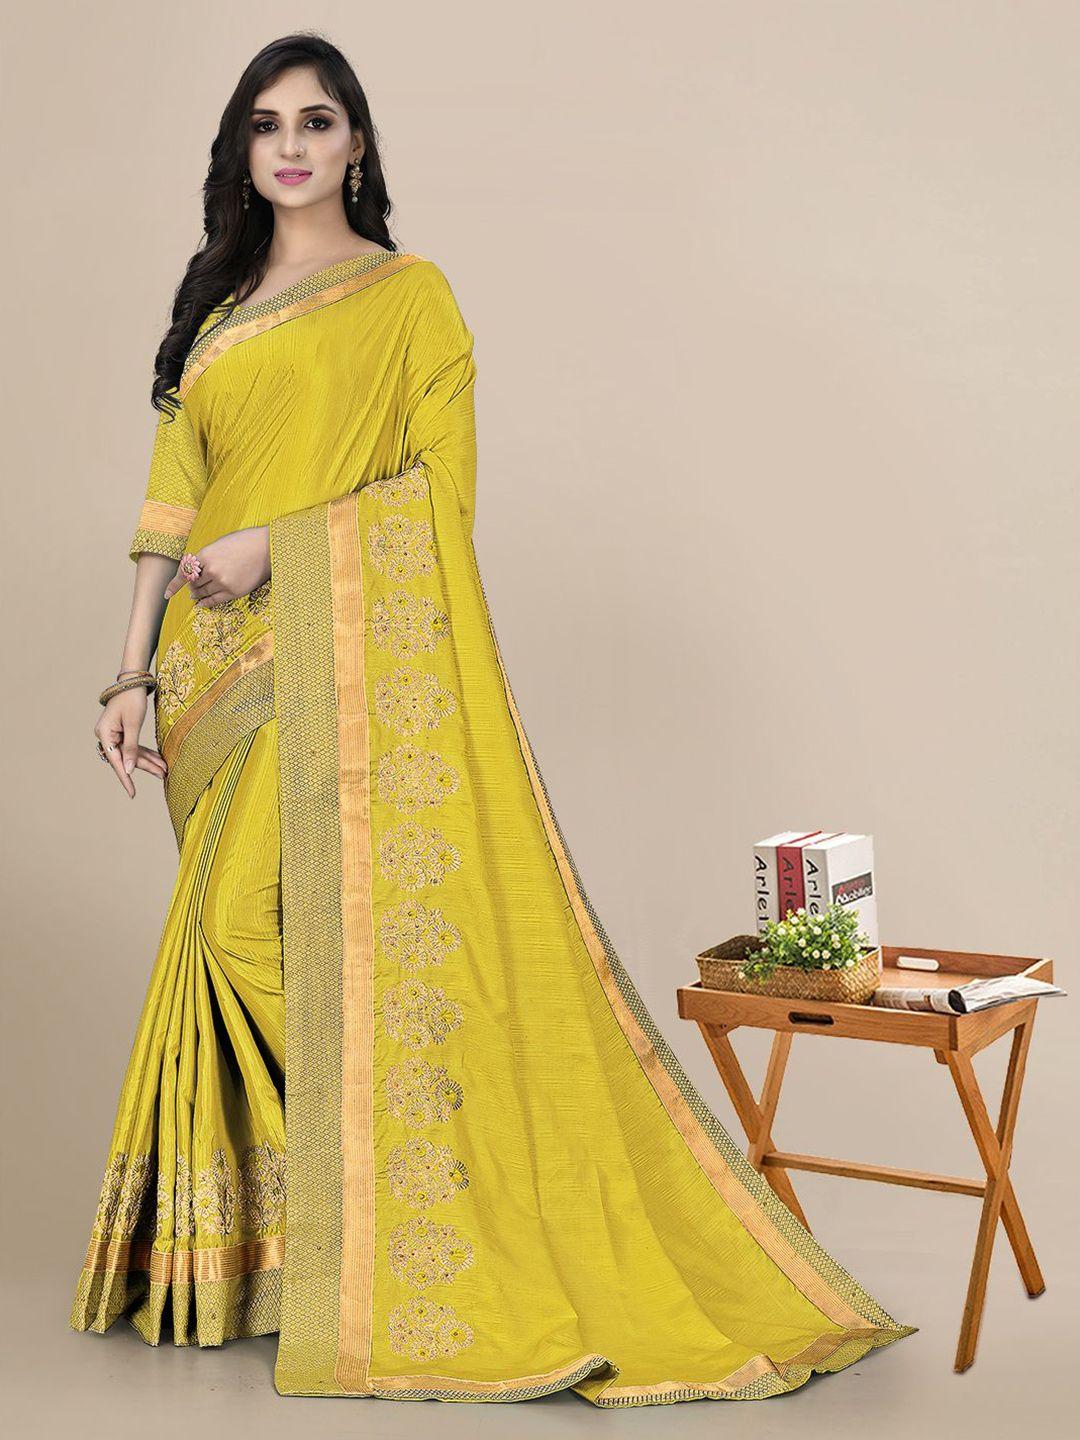 mitera yellow & gold-toned floral beads and stones silk blend saree